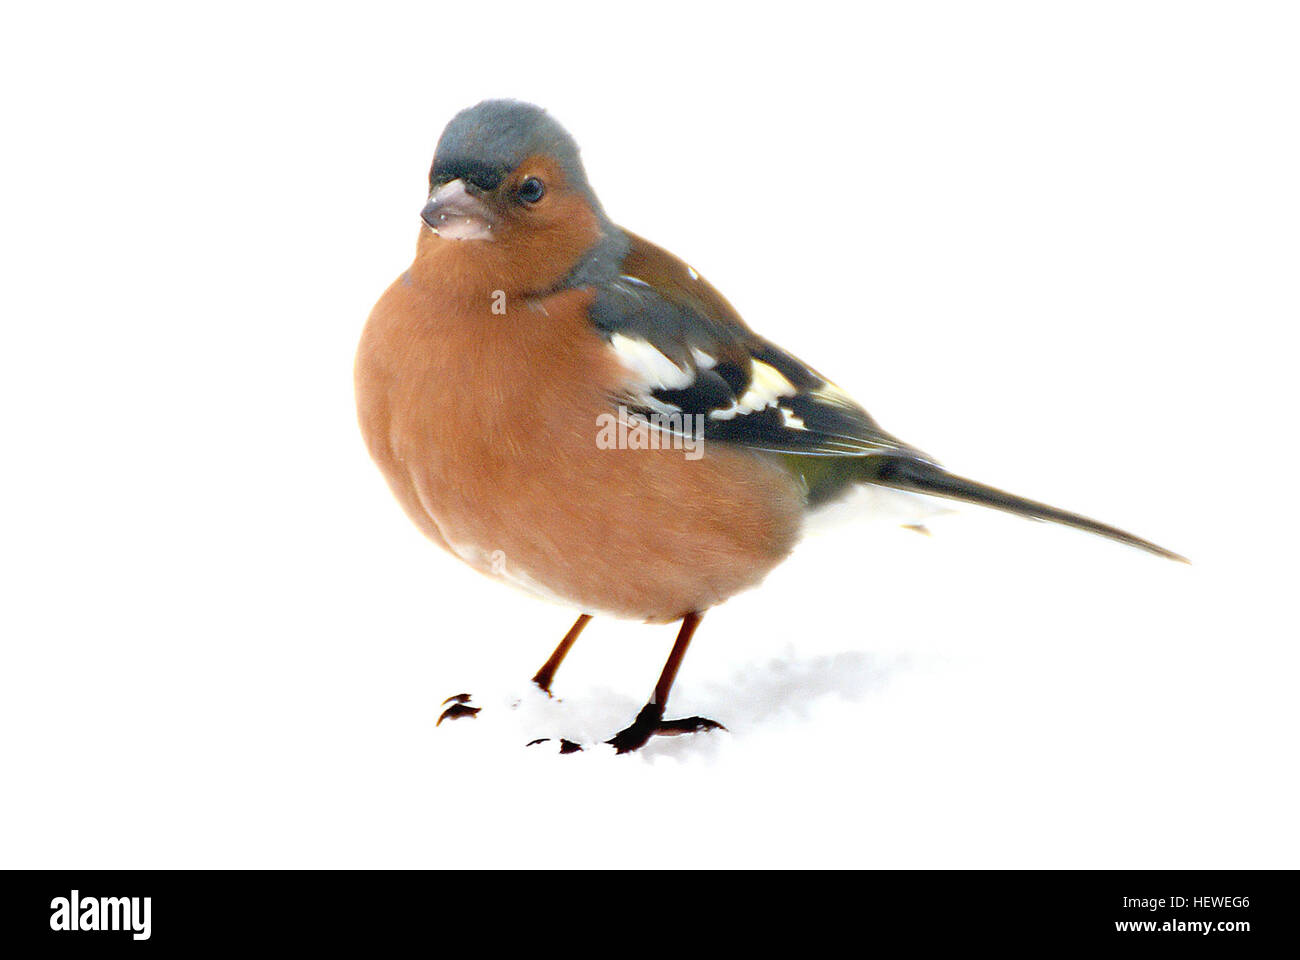 The common chaffinch, usually known simply as the chaffinch, is a common and widespread small passerine bird in the finch family. The male is brightly coloured with a blue-grey cap and rust-red underparts. Stock Photo